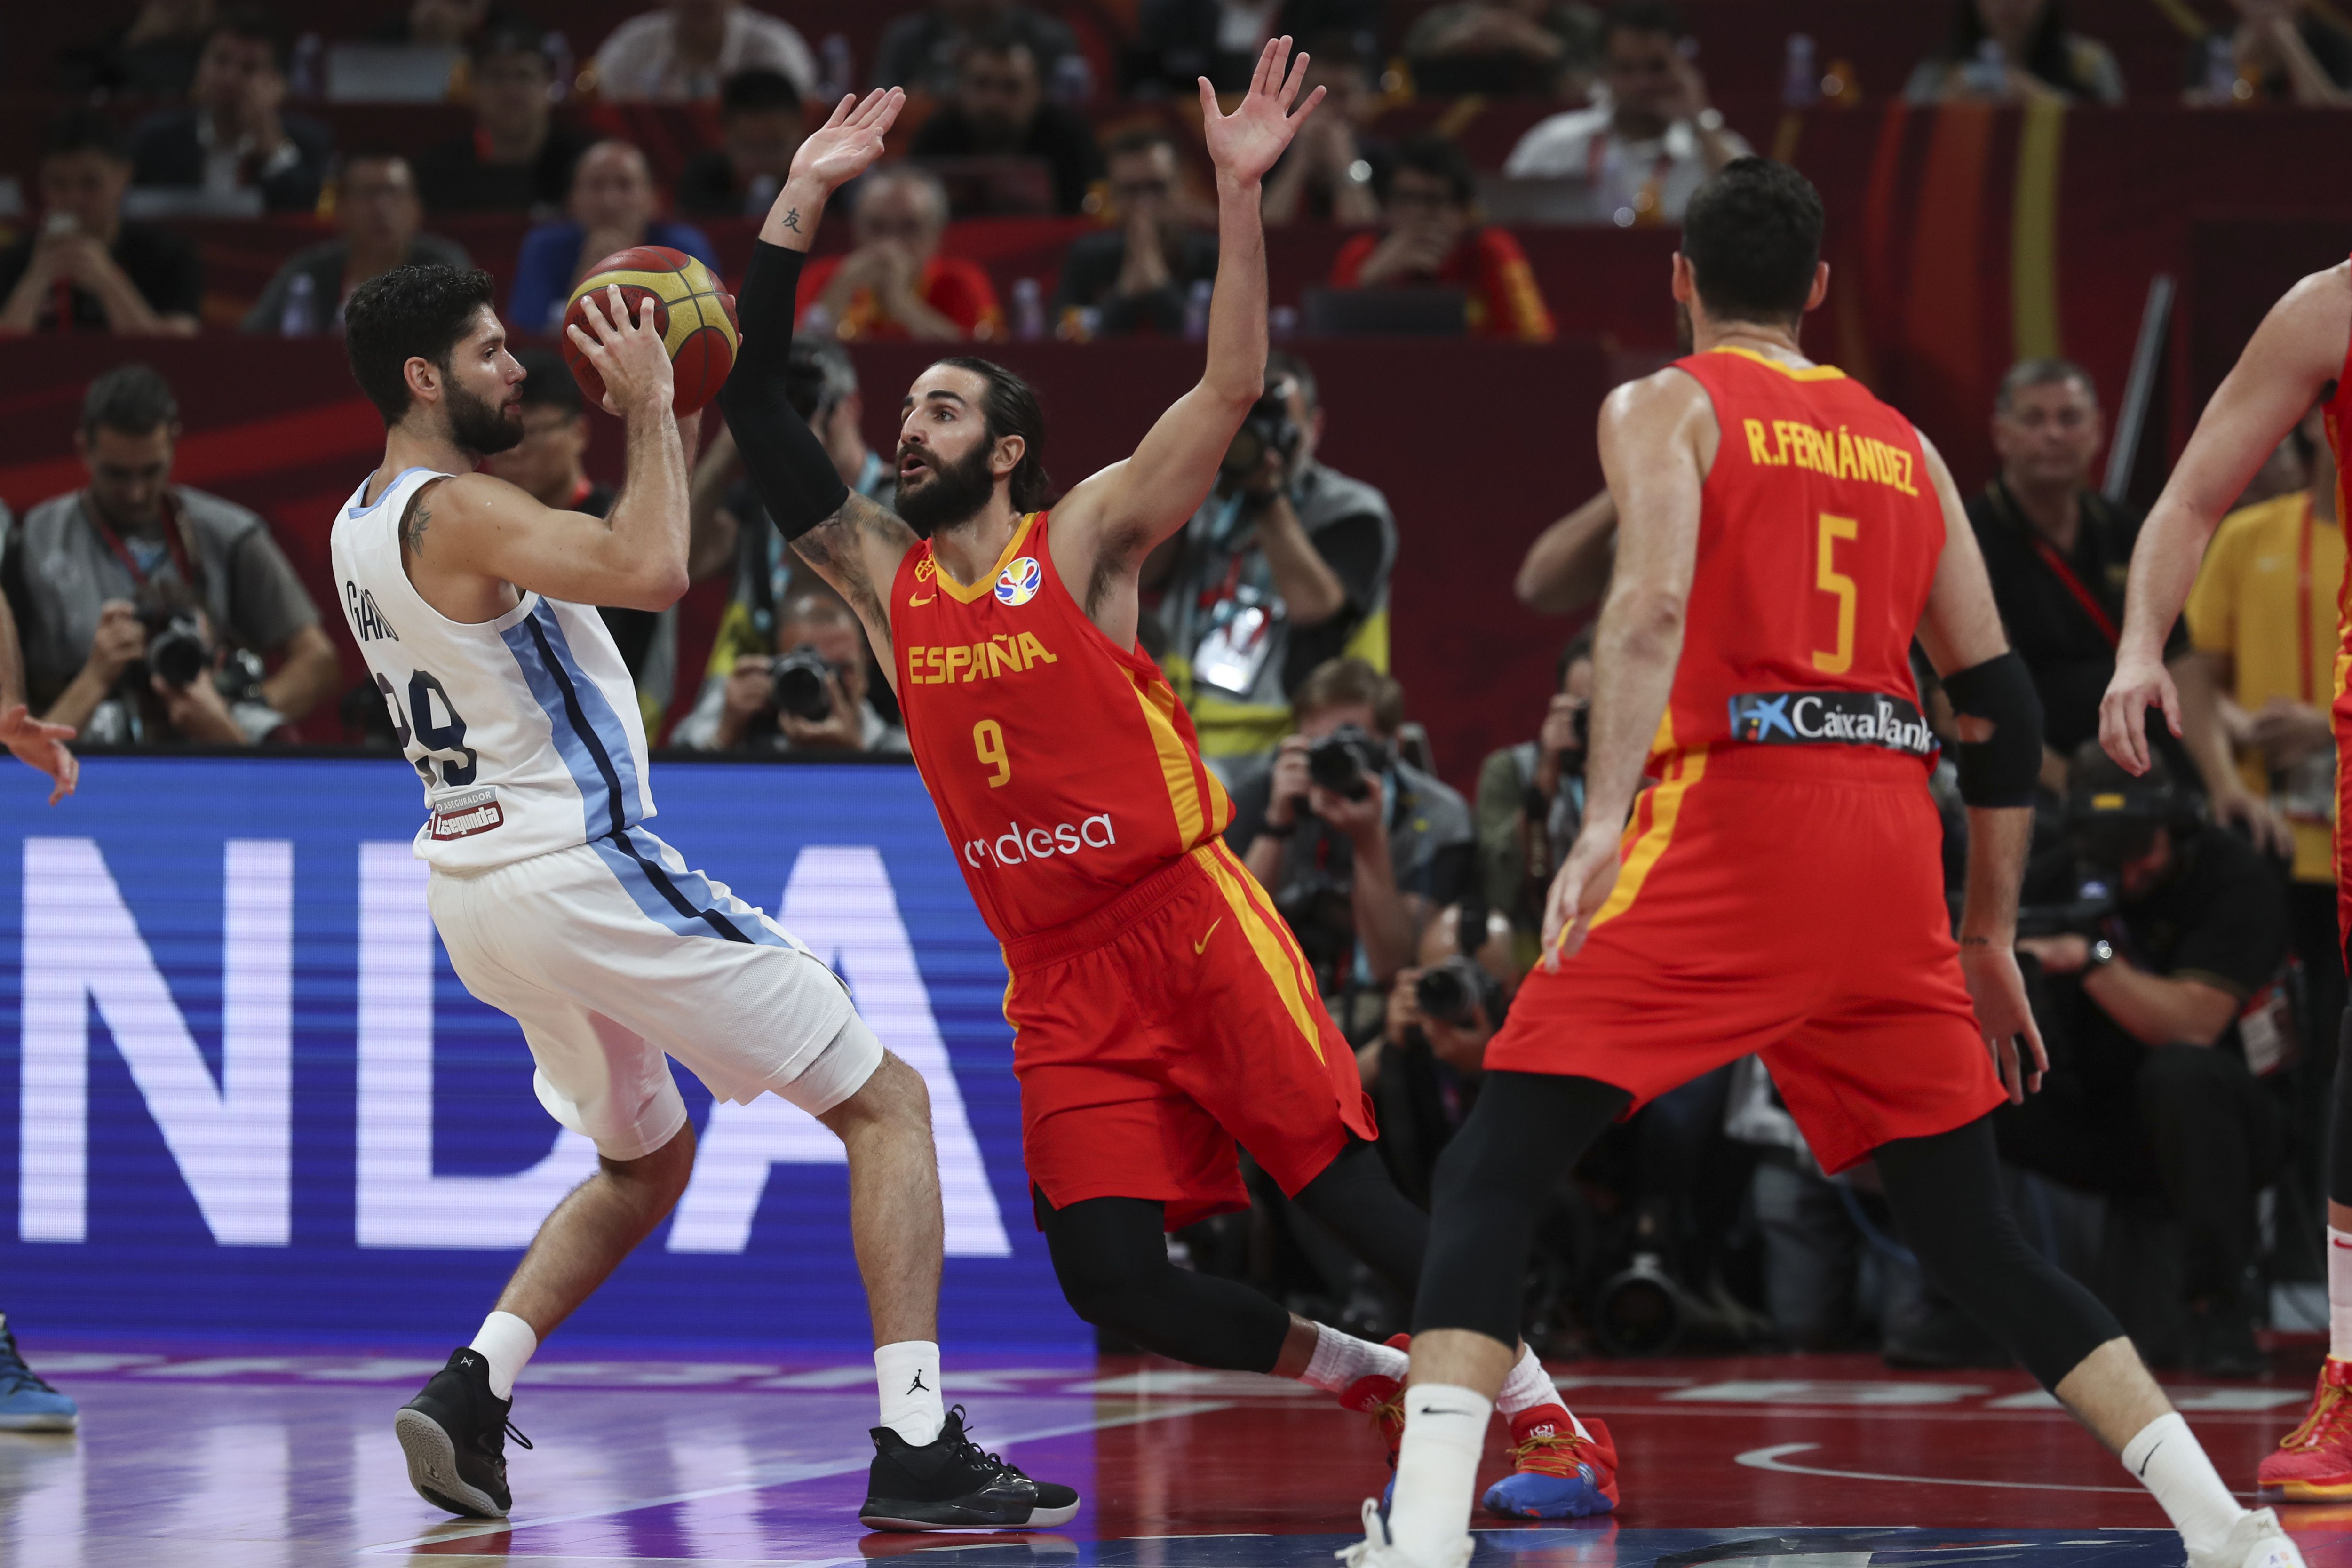 USA overcomes Ricky Rubio's 38-point blast in topping Spain in